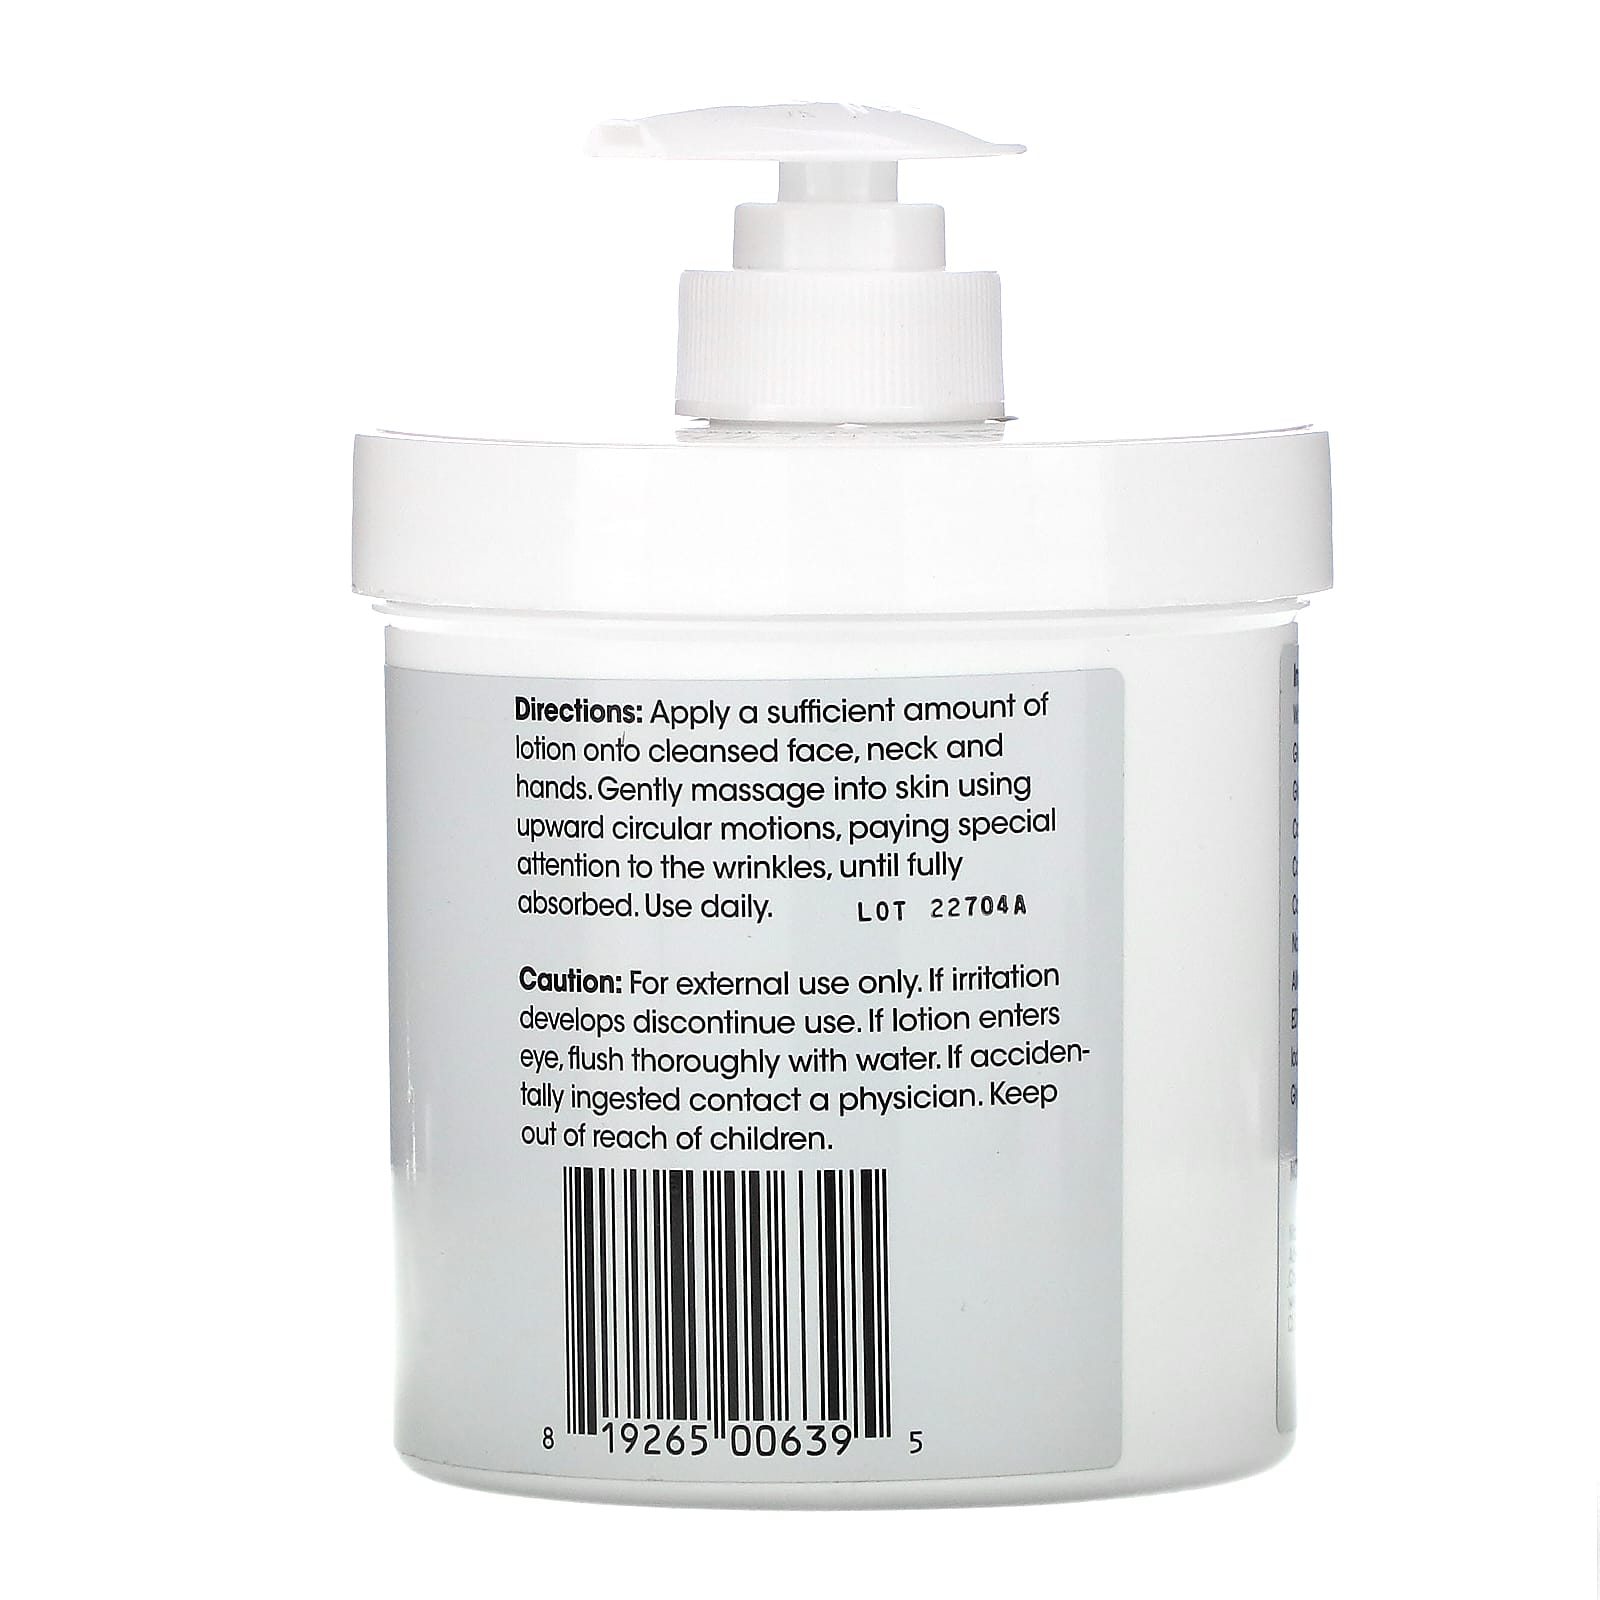 Advanced clinicals collagen skin rescue lotion 454 g